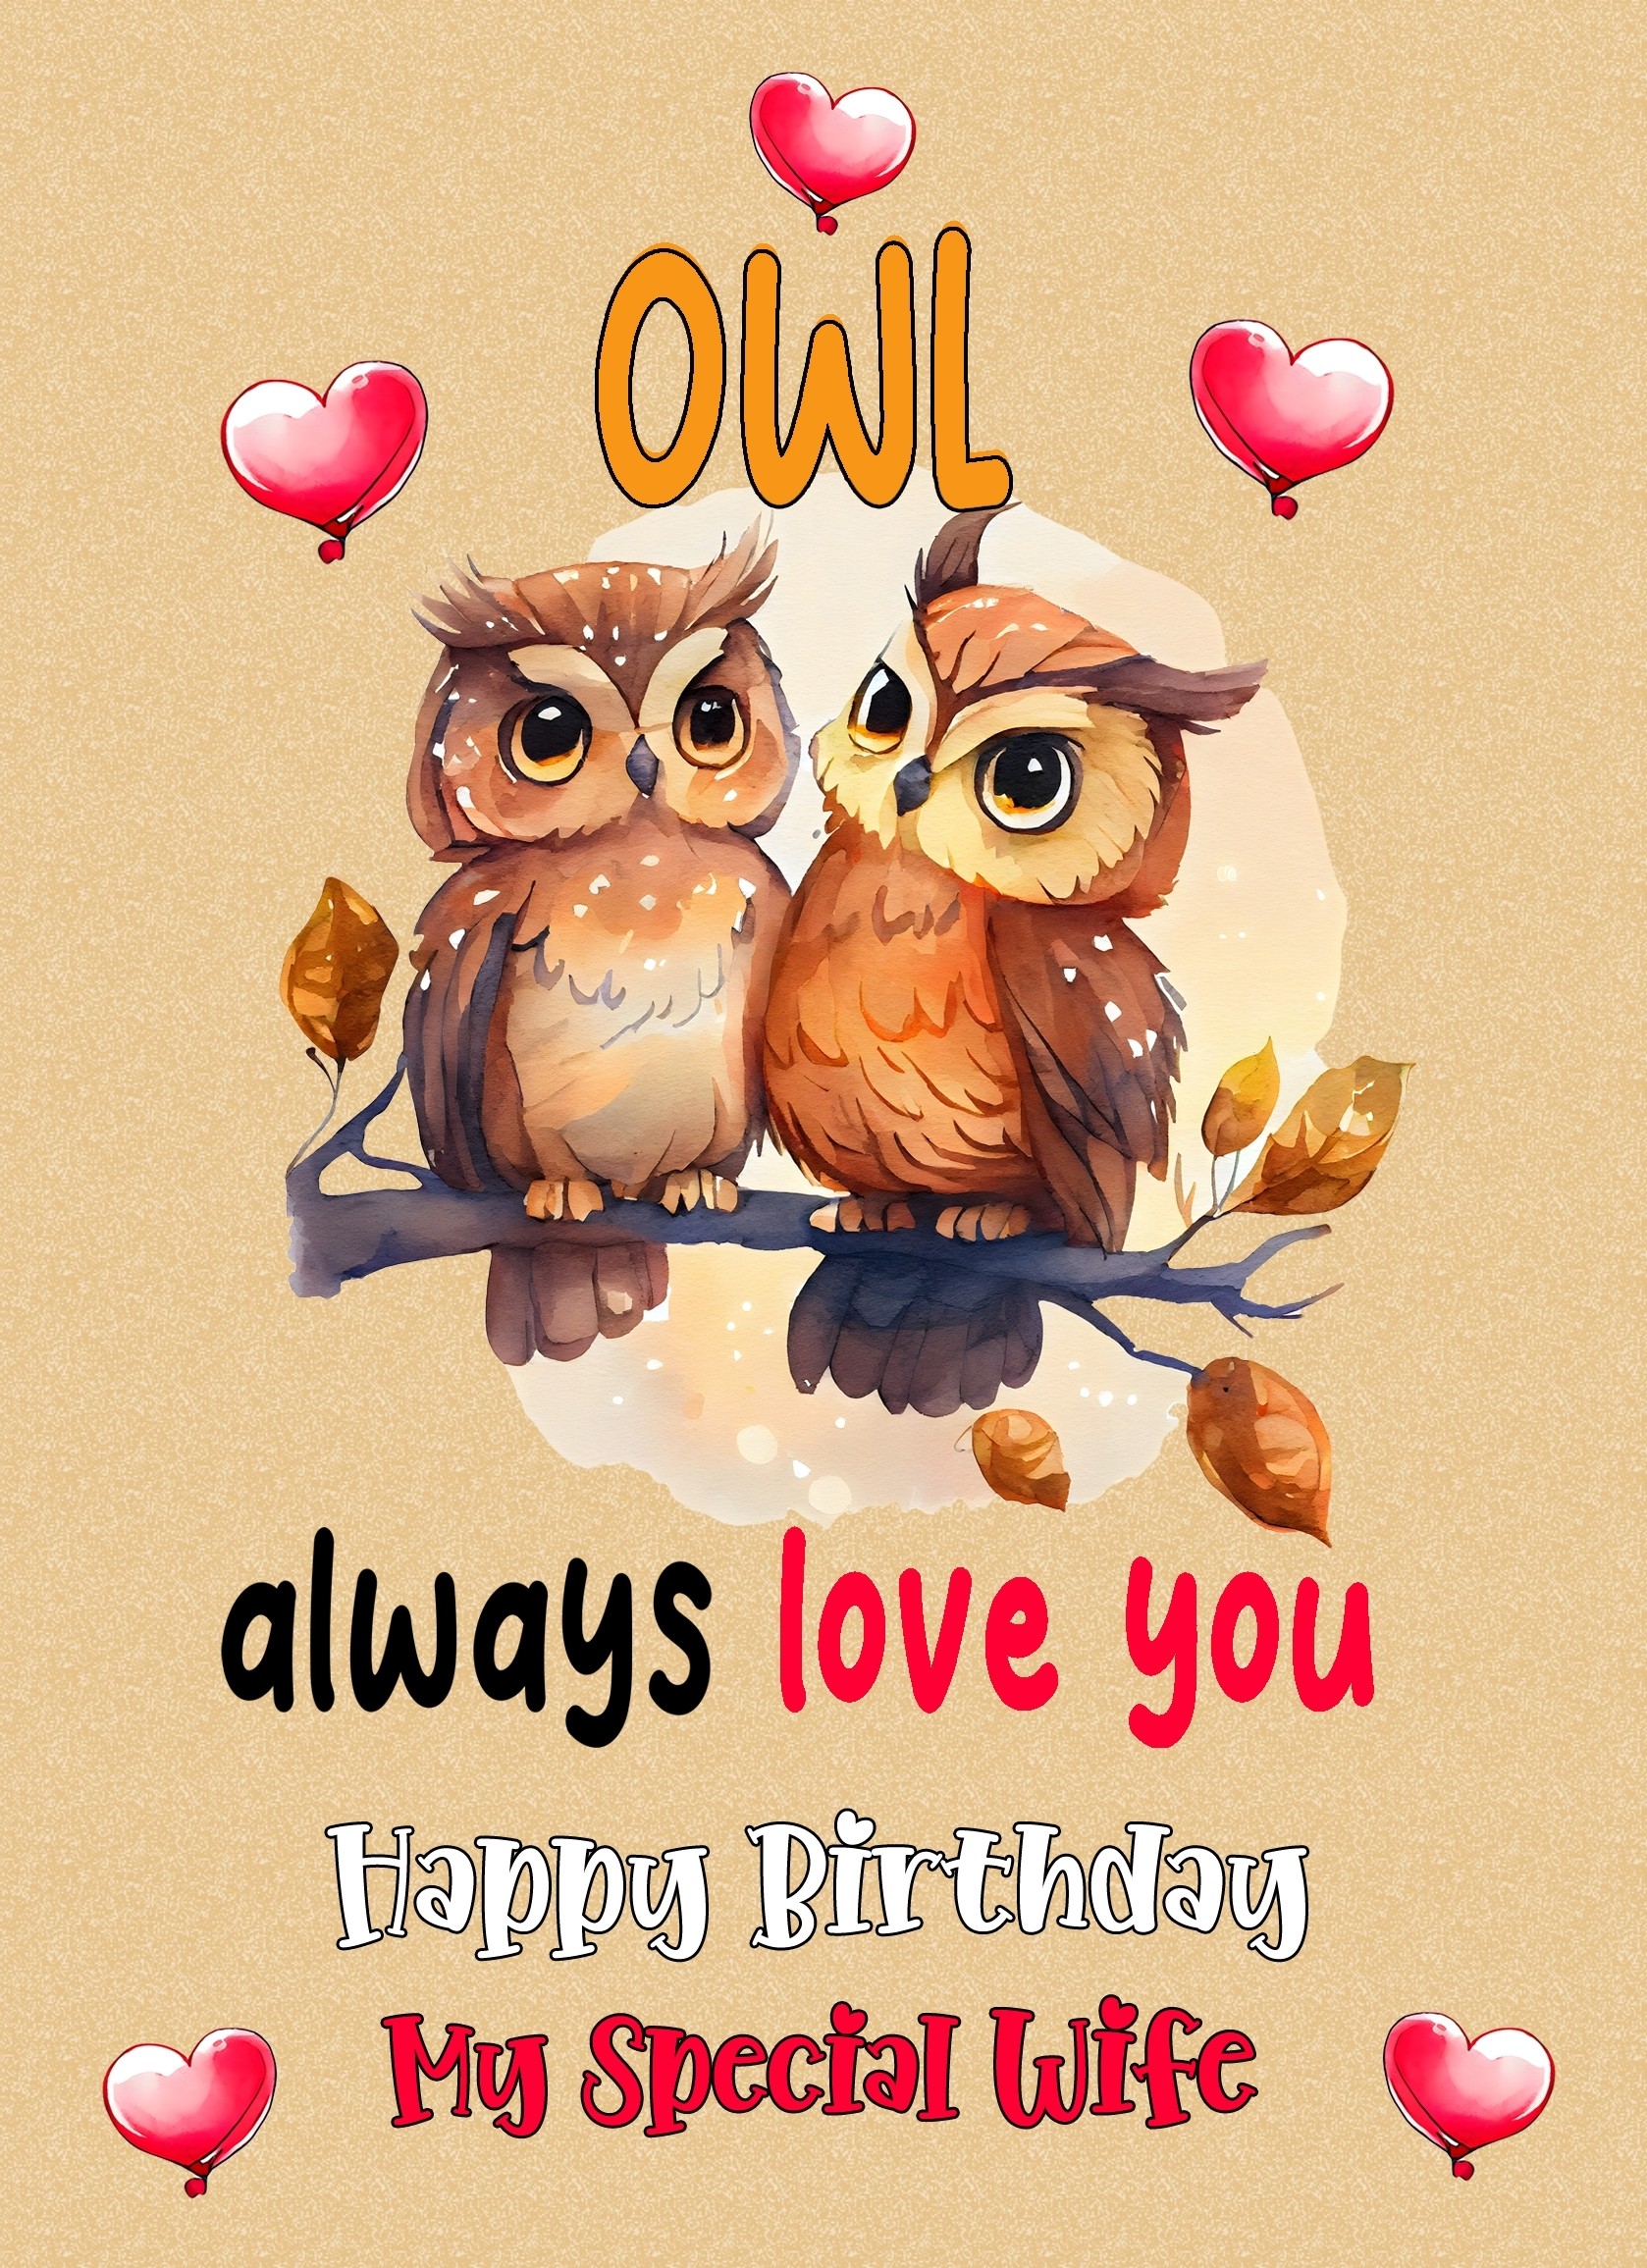 Funny Pun Romantic Birthday Card for Wife (Owl Always Love You)